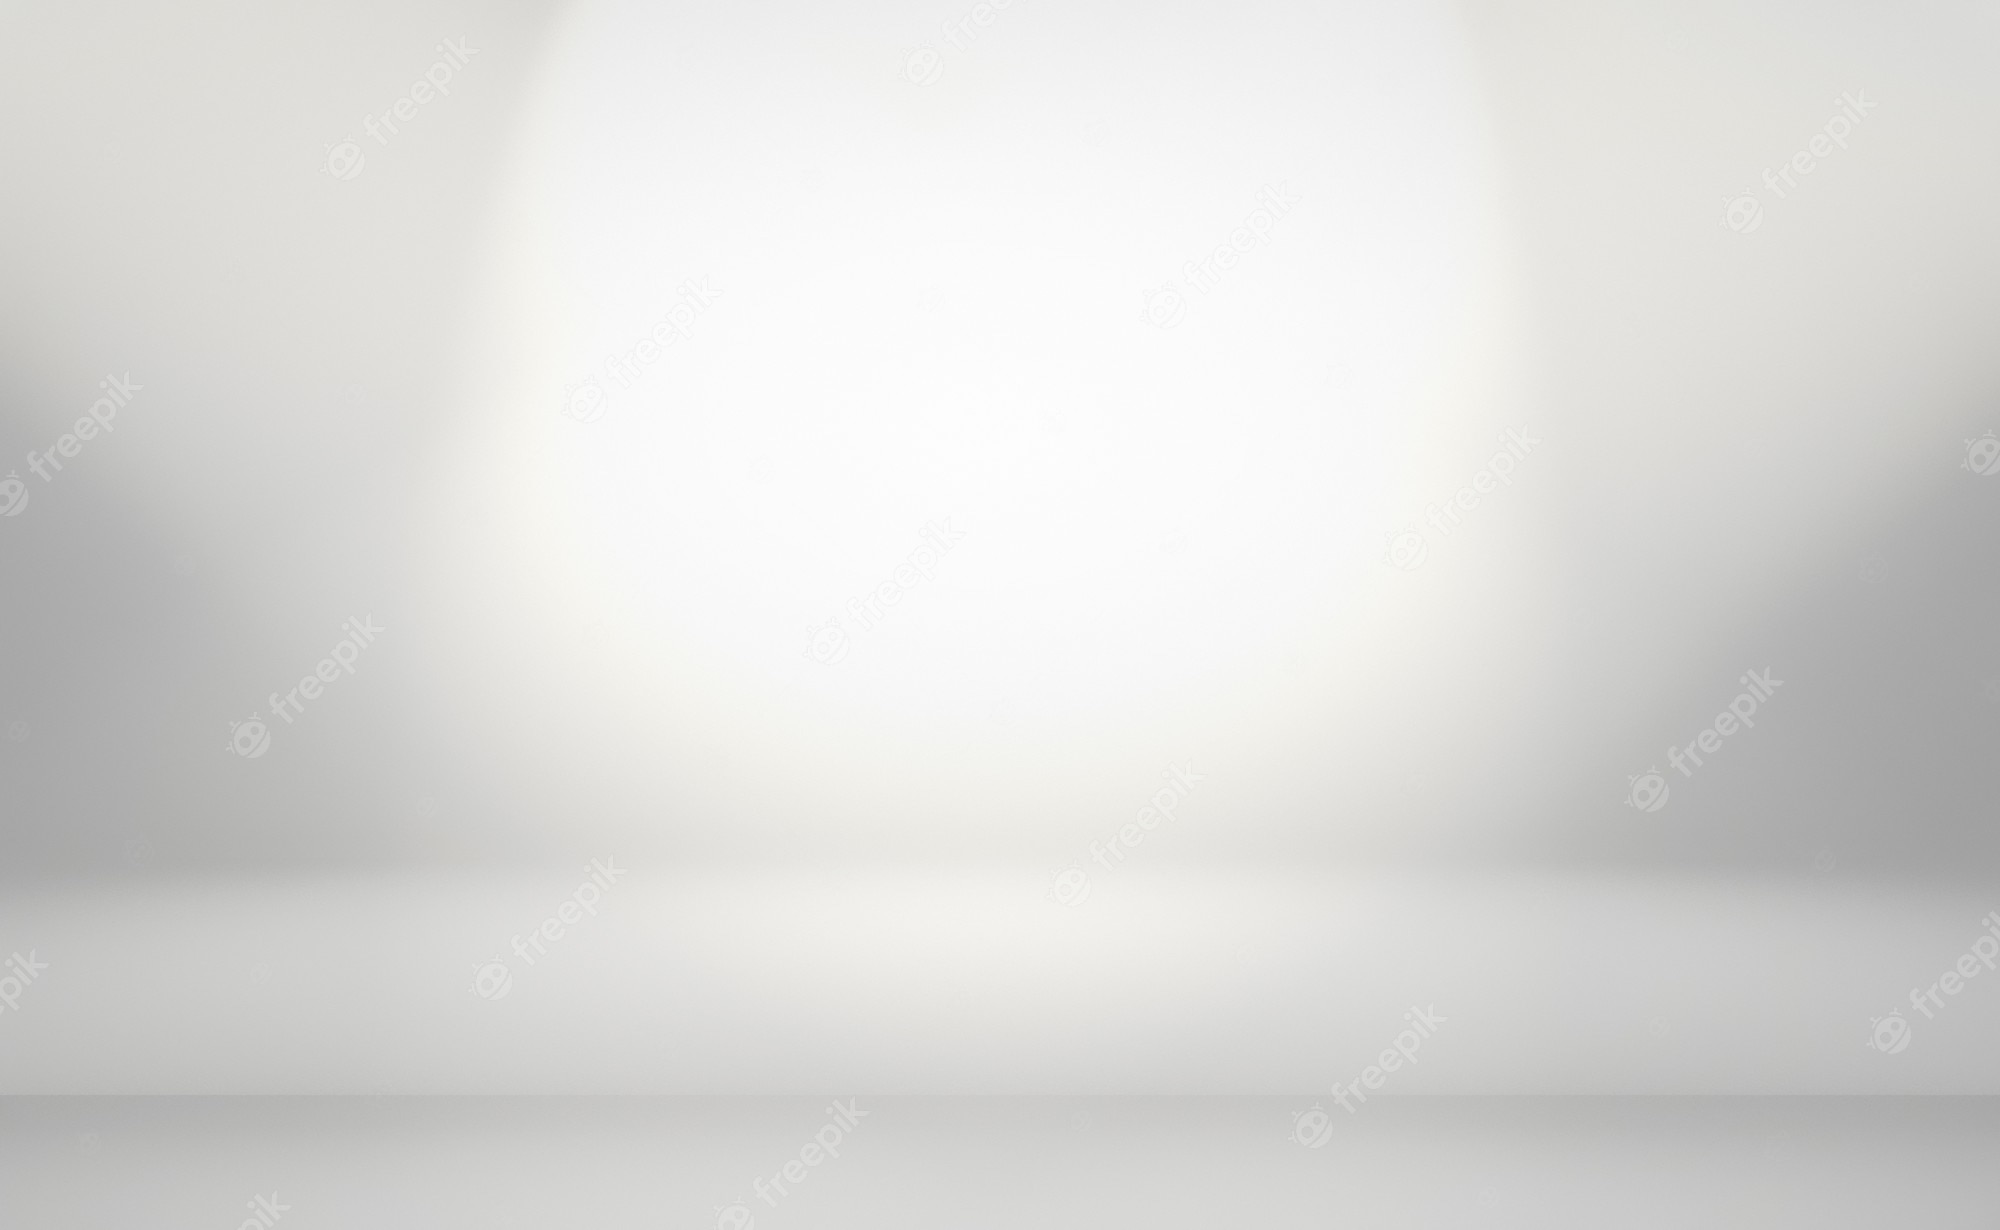 Abstract Luxury Plain Blur Grey And Black Gradient White Background ...